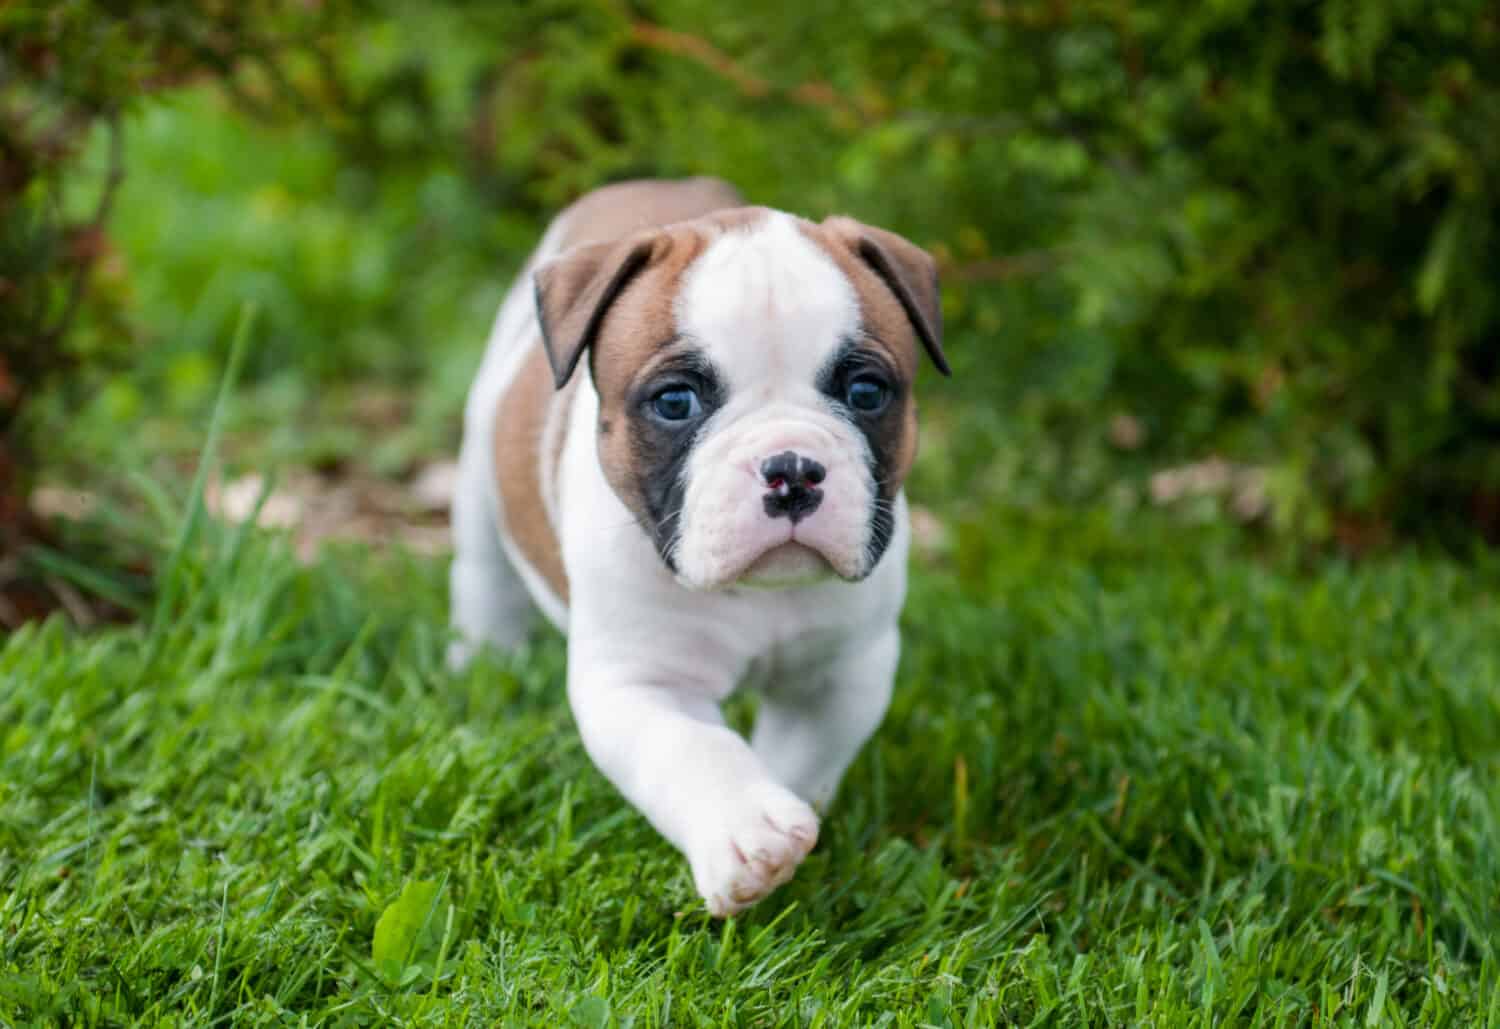 Funny nice red white American Bulldog puppy is walking on the grass. Puppy's acquaintance with nature. Dog is afraid of the world